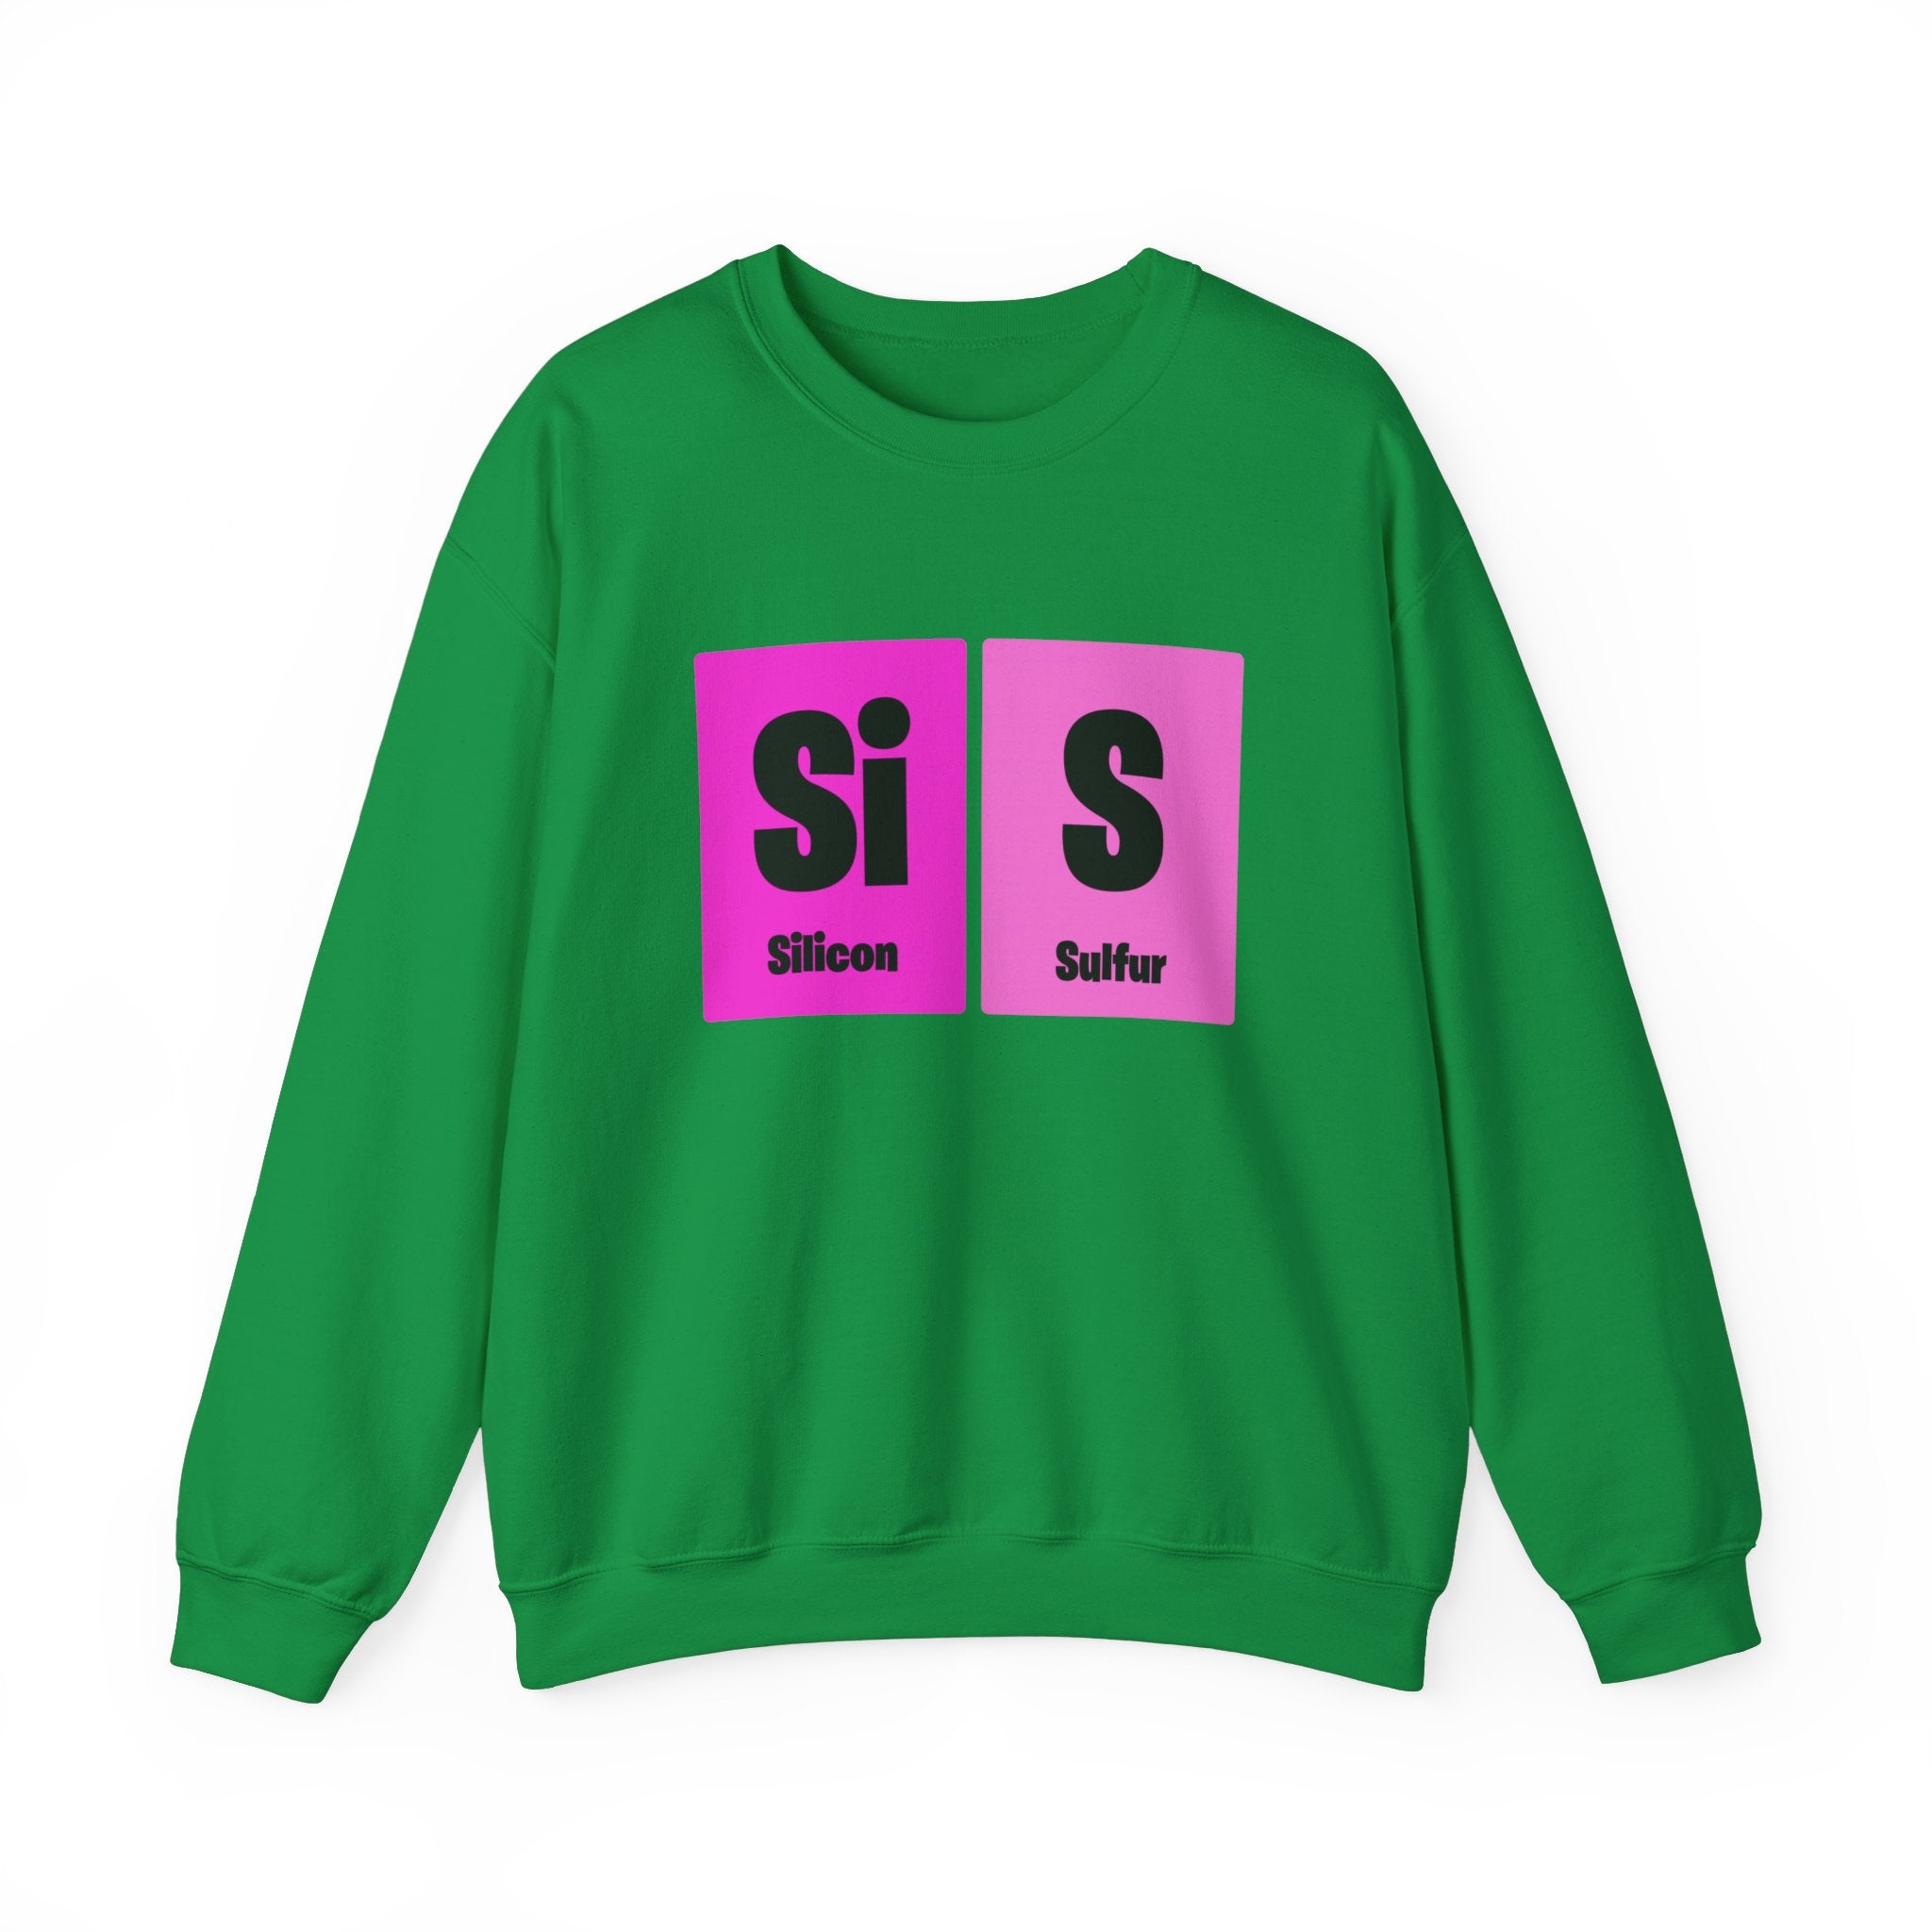 Si-S Light Pendant - Sweatshirt with two pink squares displaying the symbols and names for the elements silicon (Si) and sulfur (S). This fashion & warmth piece is perfect for showcasing your love of science.